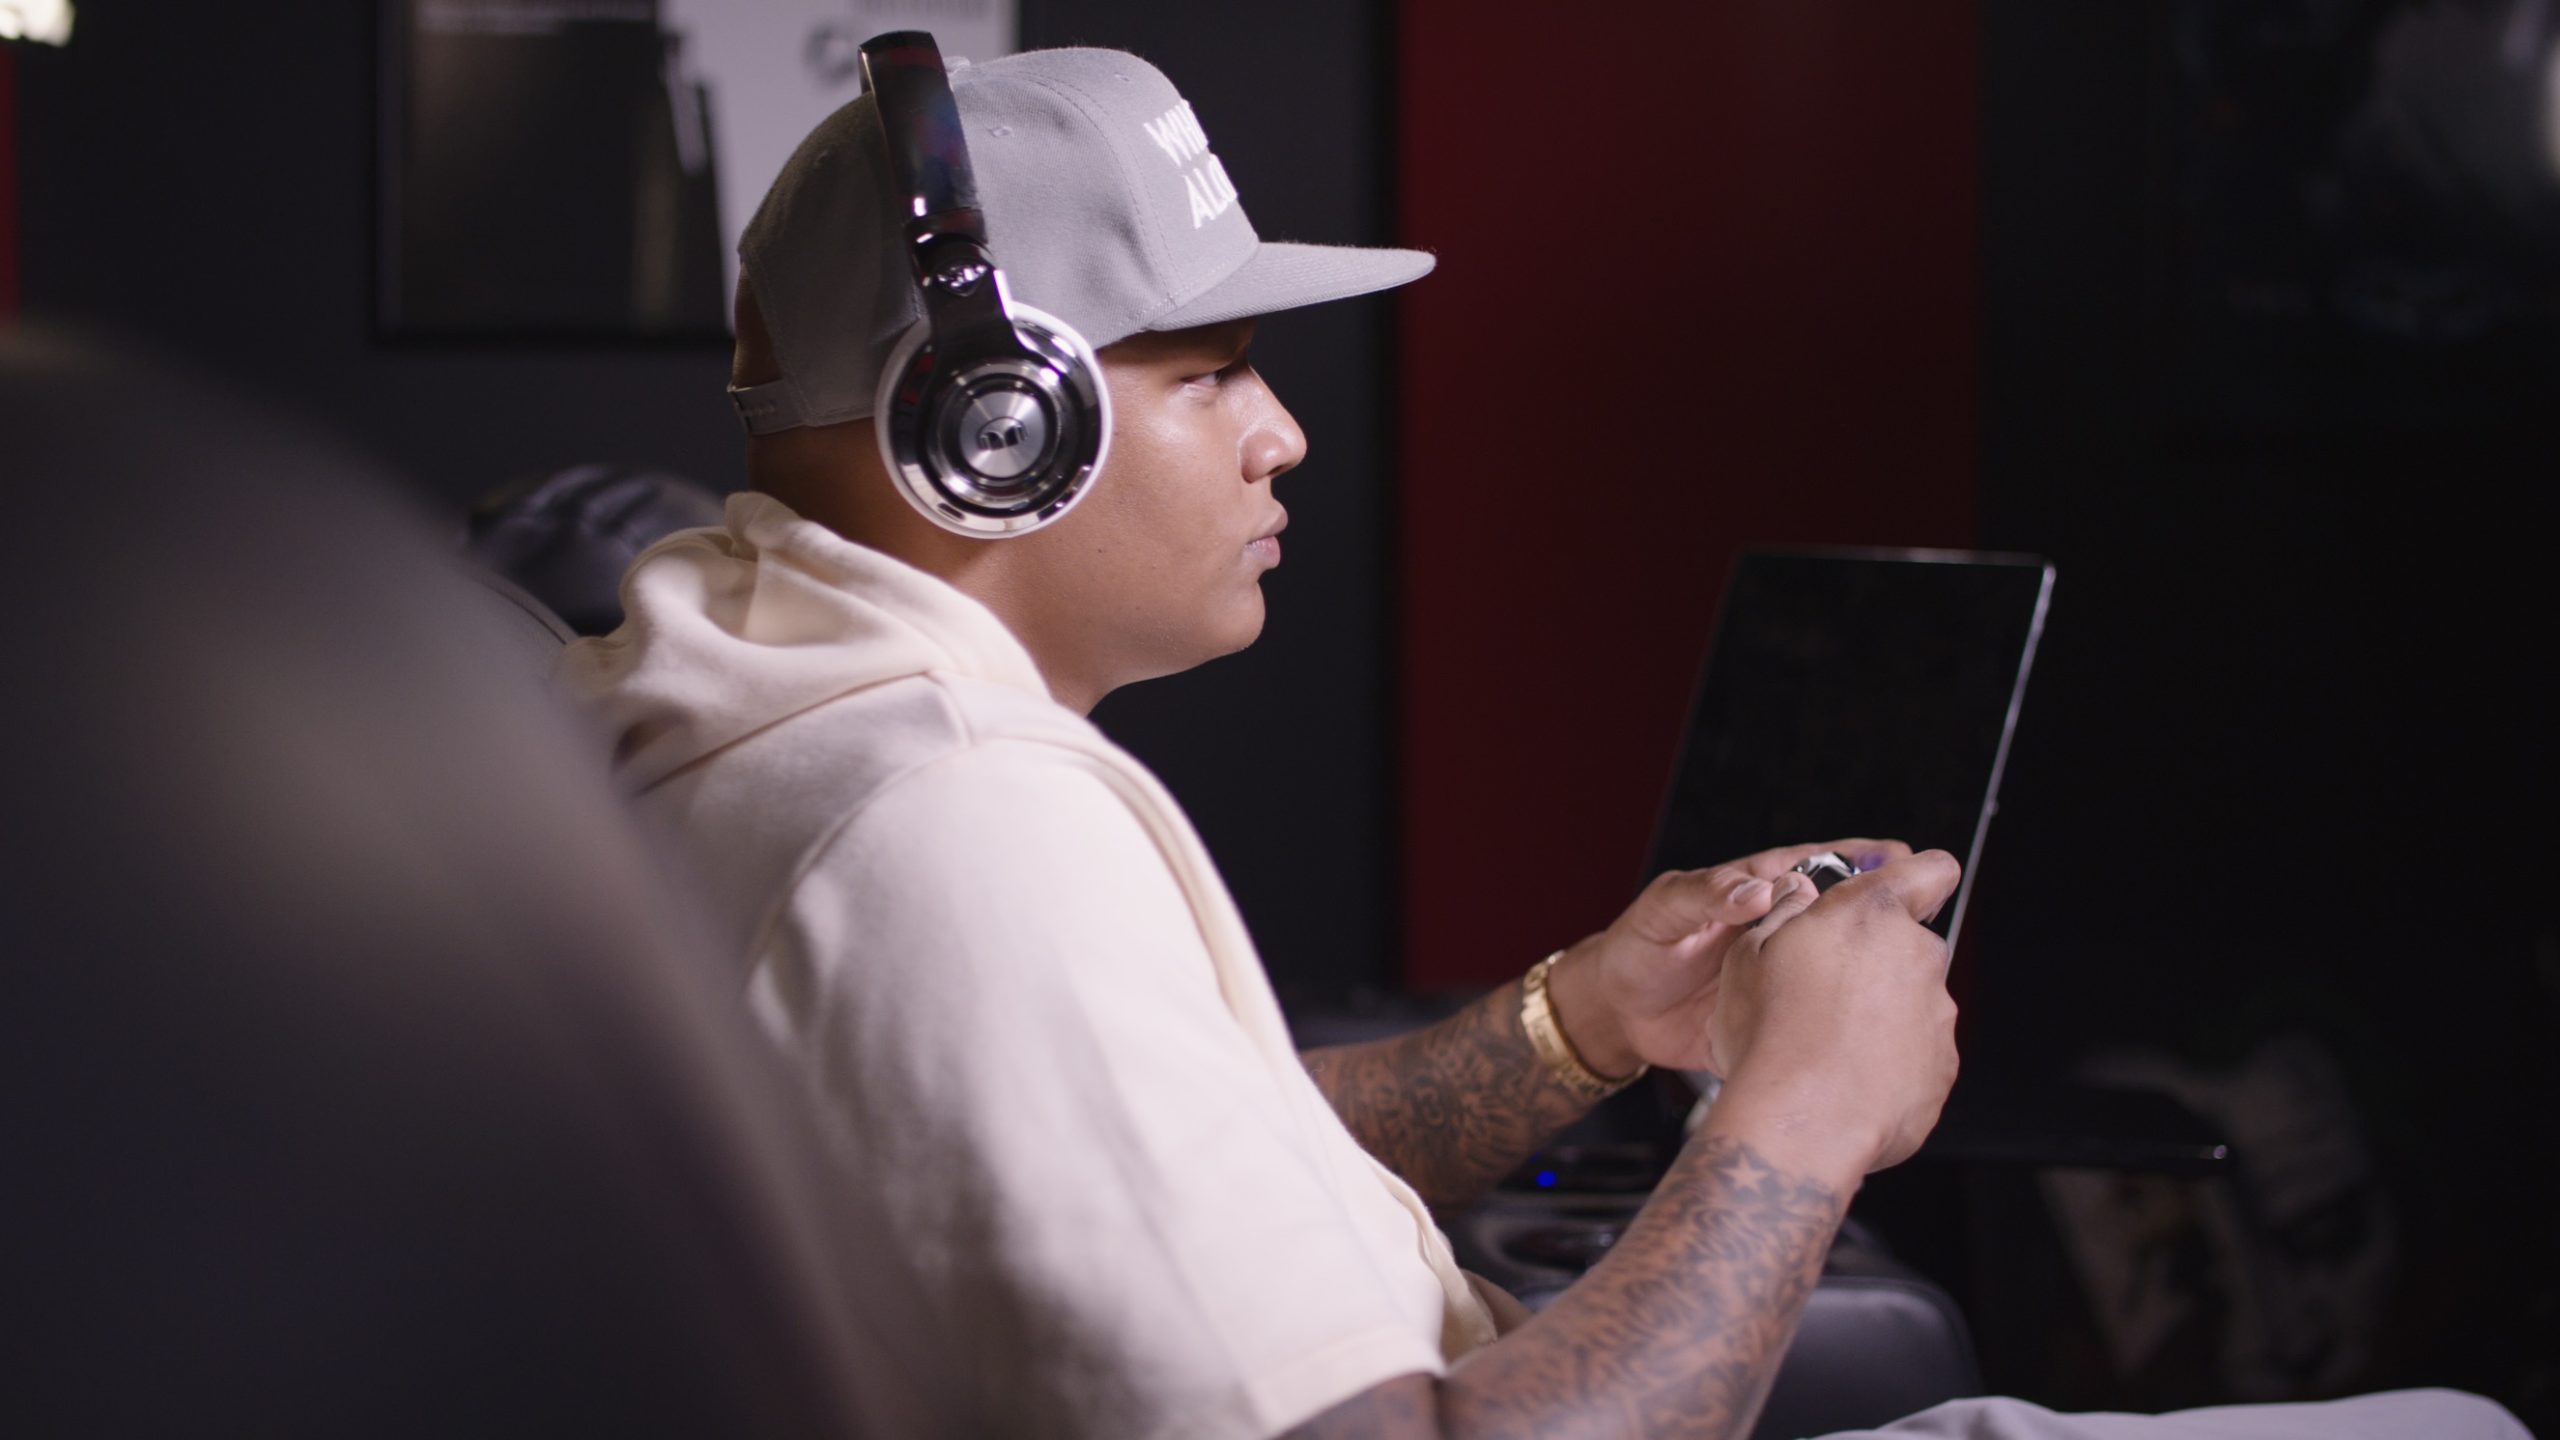 Monster Music Charlie Villanueva Side profile of man wearing headphones and gray cap using a video game controller